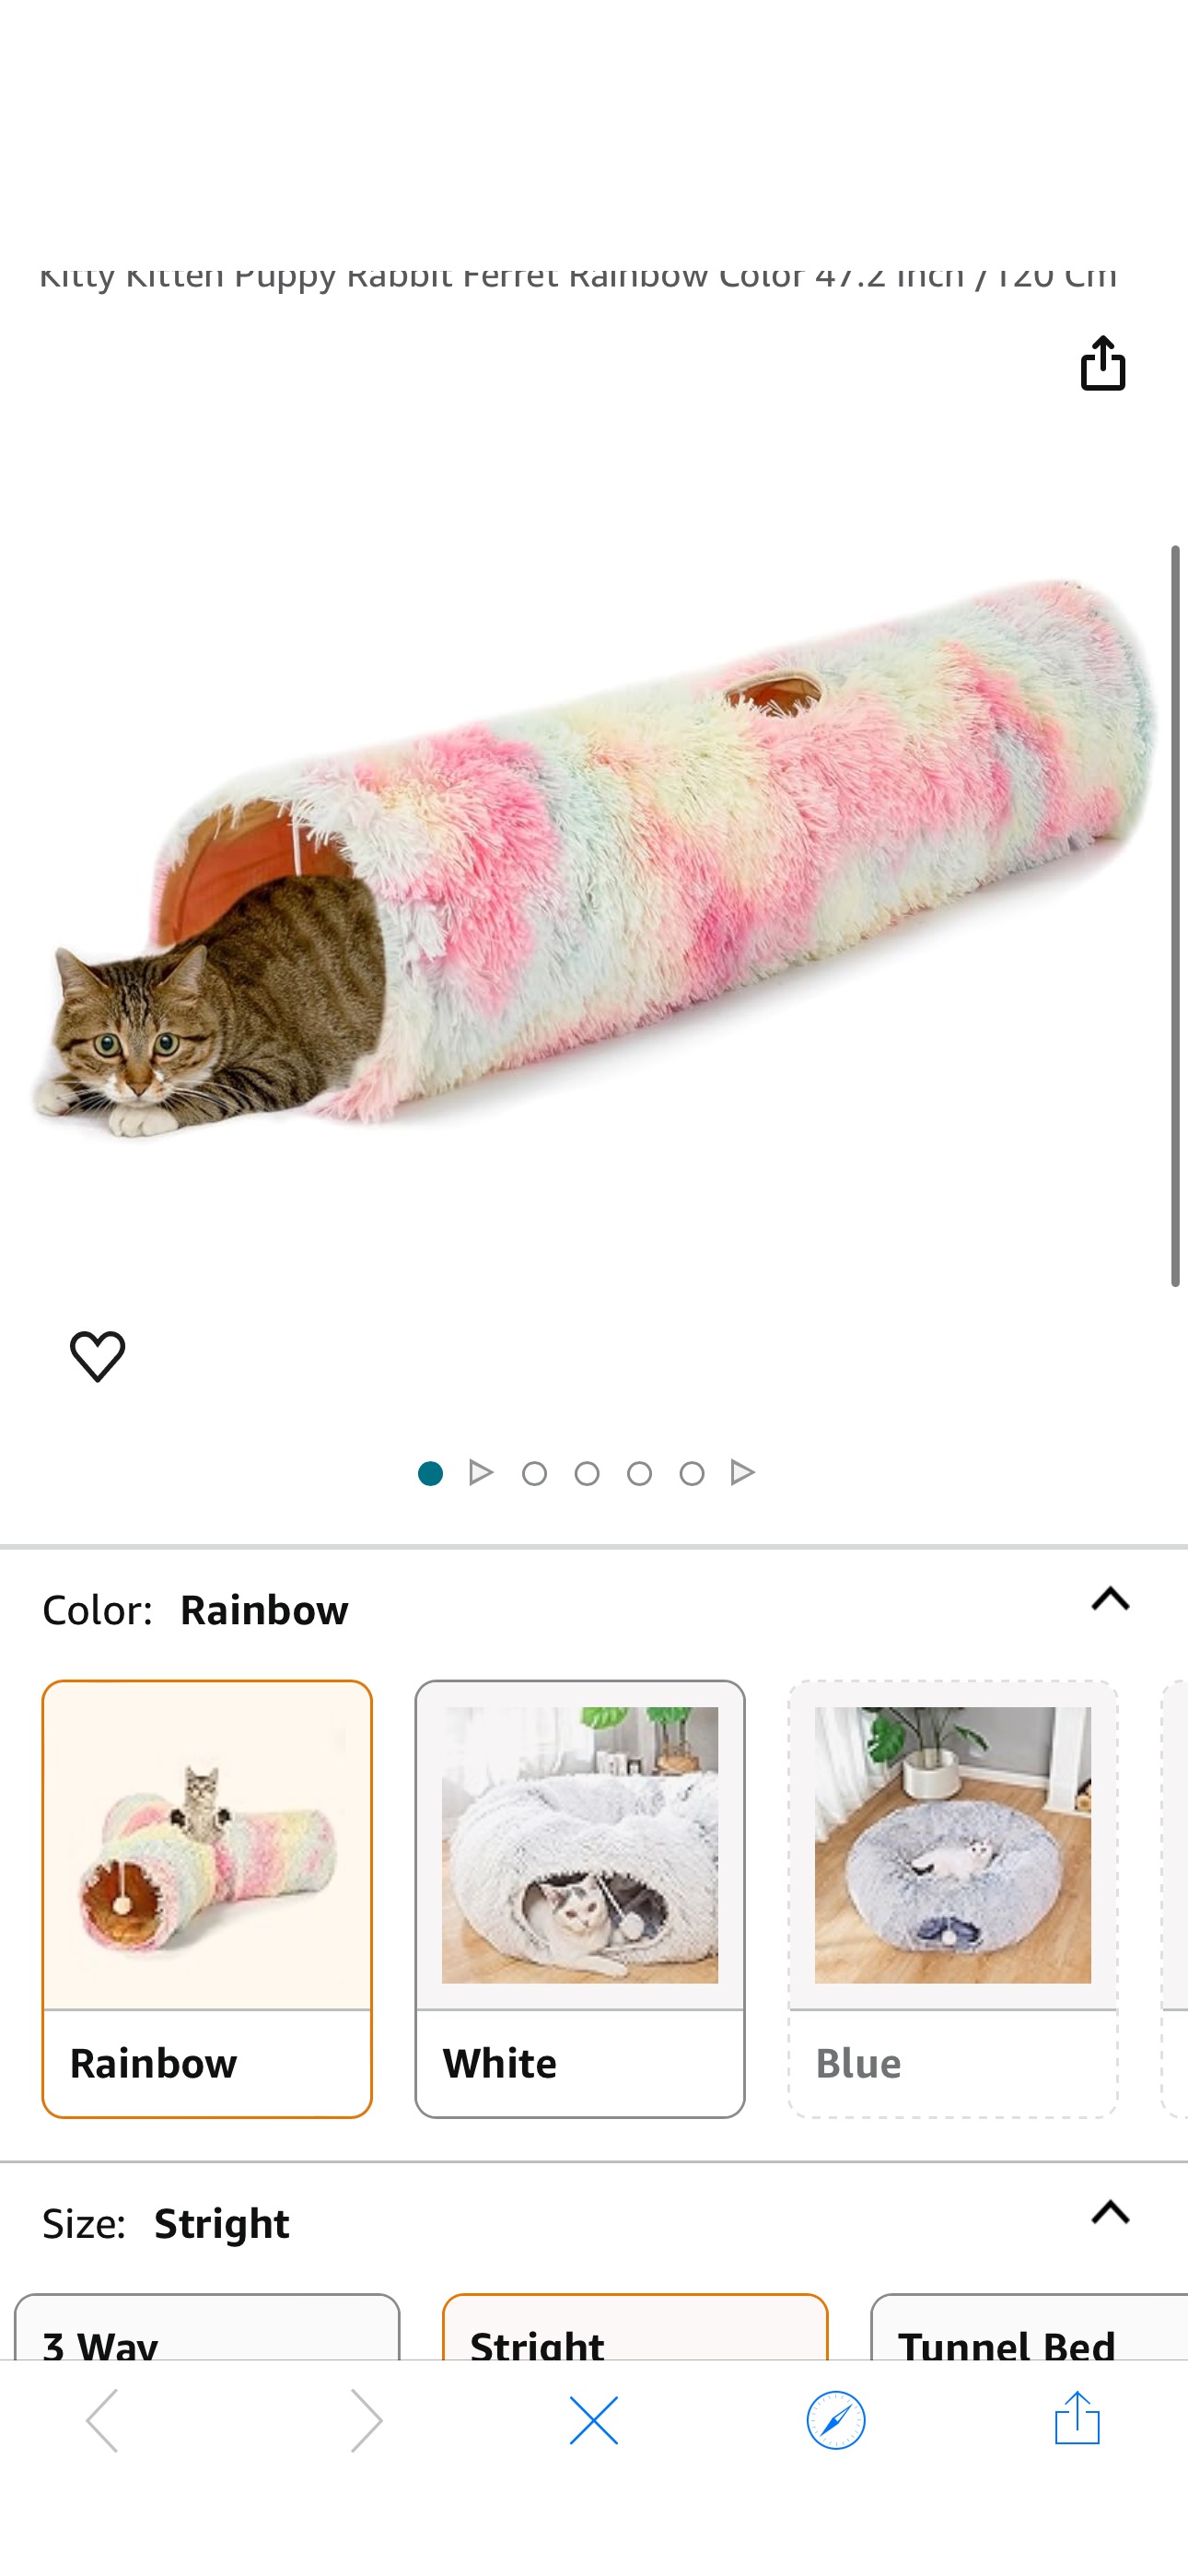 Amazon.com: LUCKITTY Fluffy Plush Cat Tunnel Toy Collapsible, for Indoor Cat Kitty Kitten Puppy Rabbit Ferret Rainbow Color 47.2 Inch /120 Cm : Pet Supplies